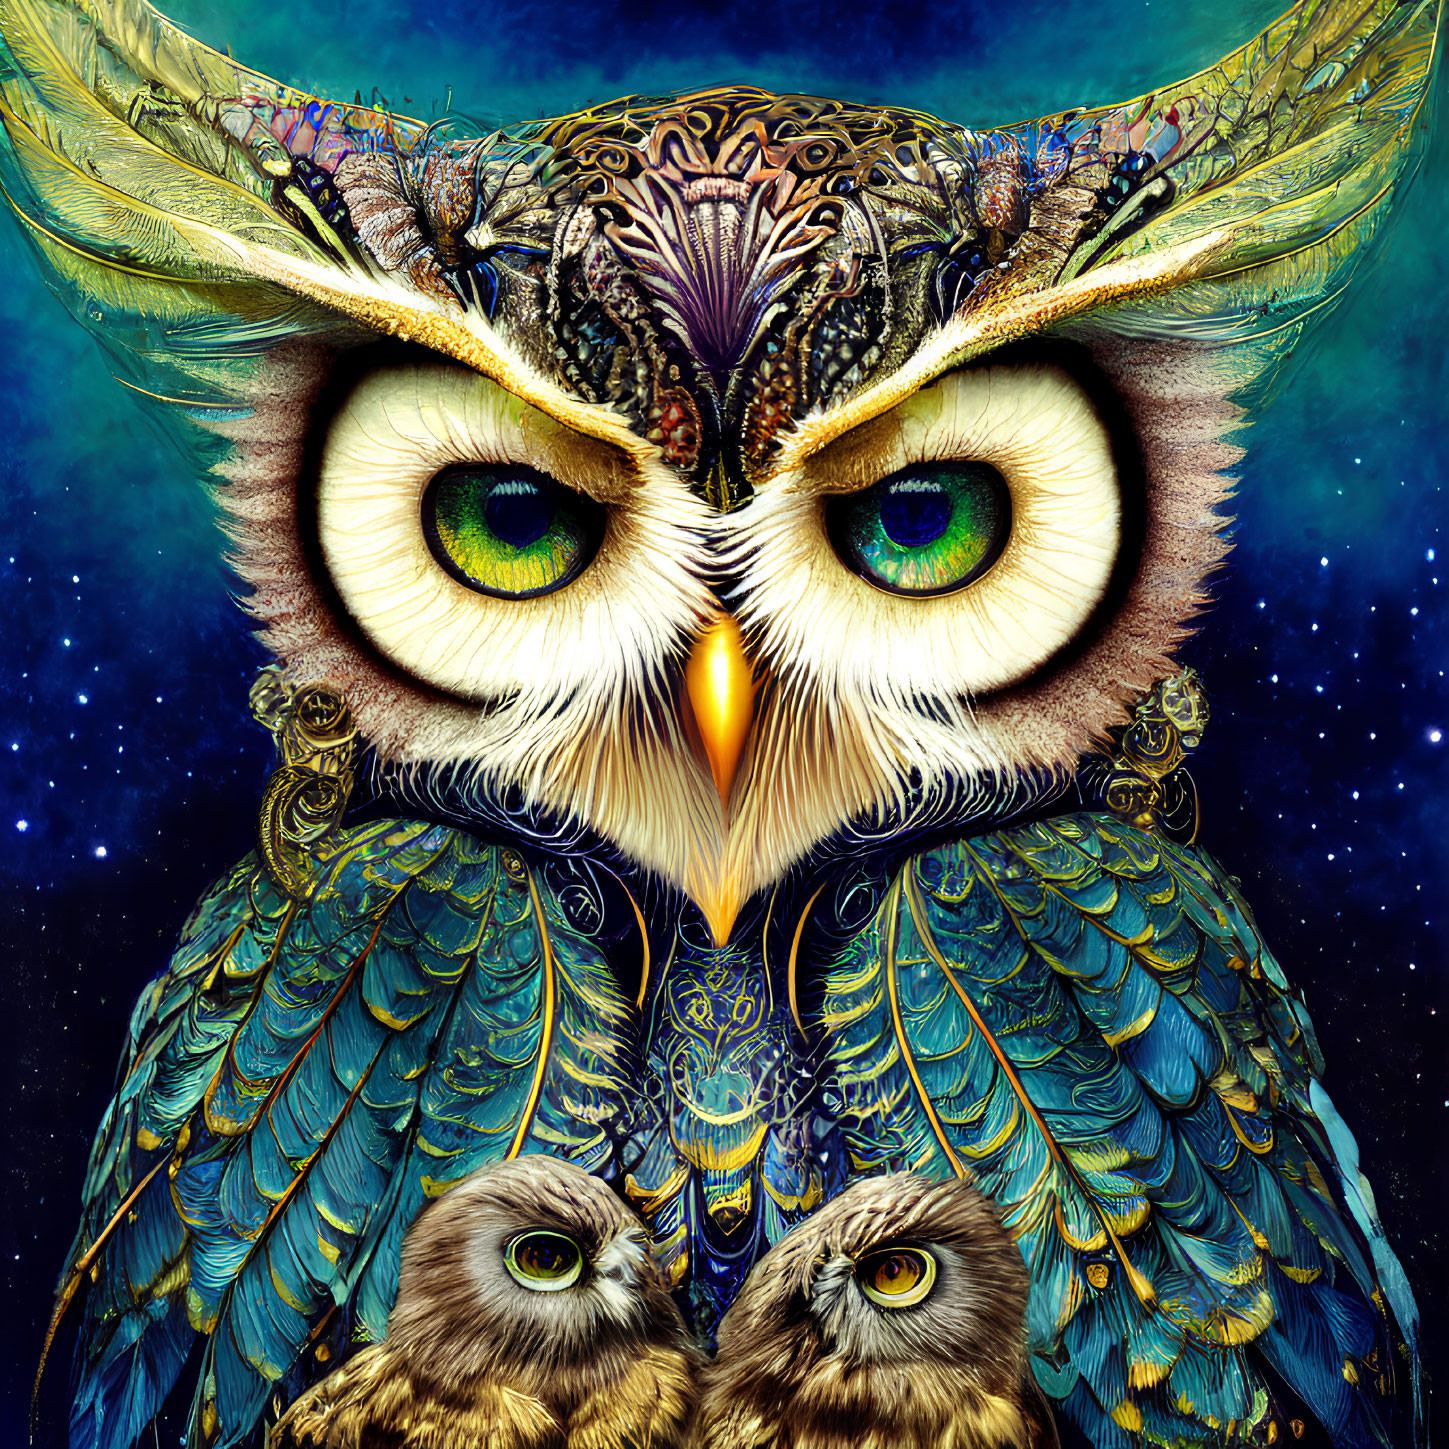 Colorful Owl Illustration with Intricate Patterns and Starry Night Background